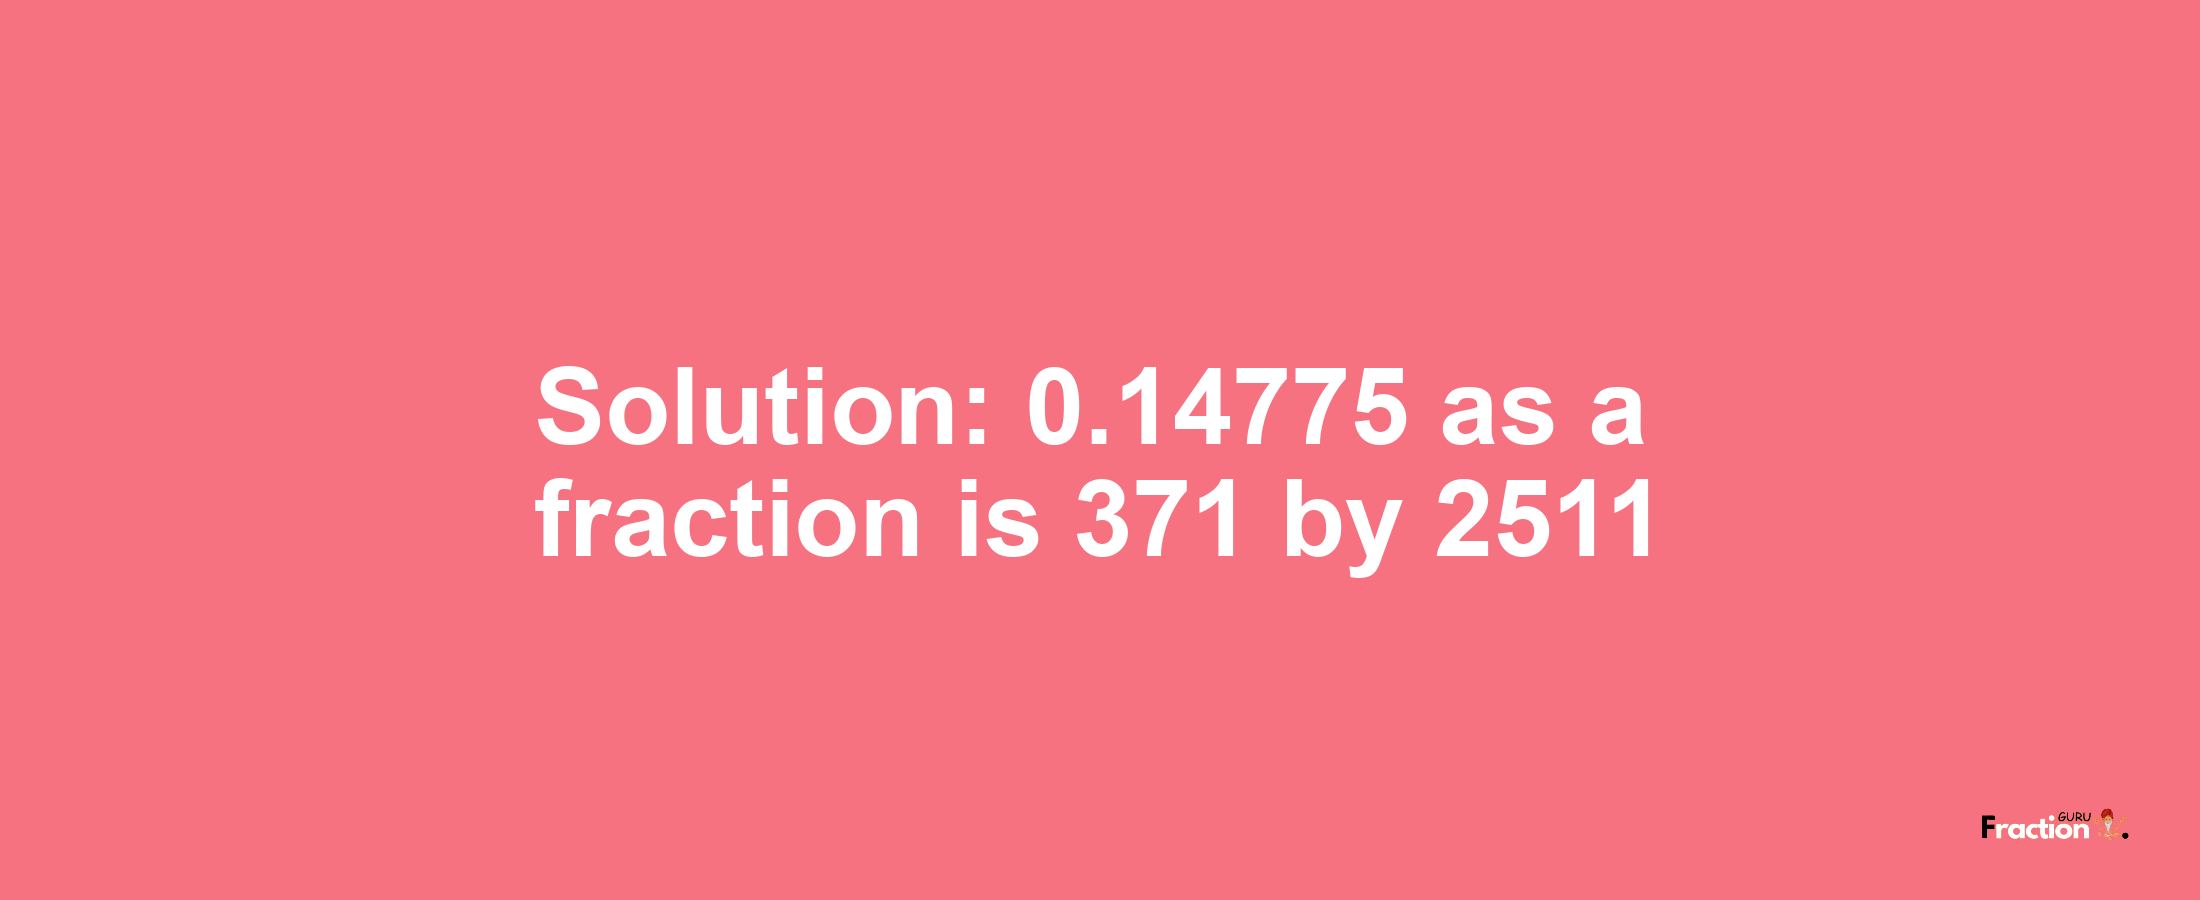 Solution:0.14775 as a fraction is 371/2511